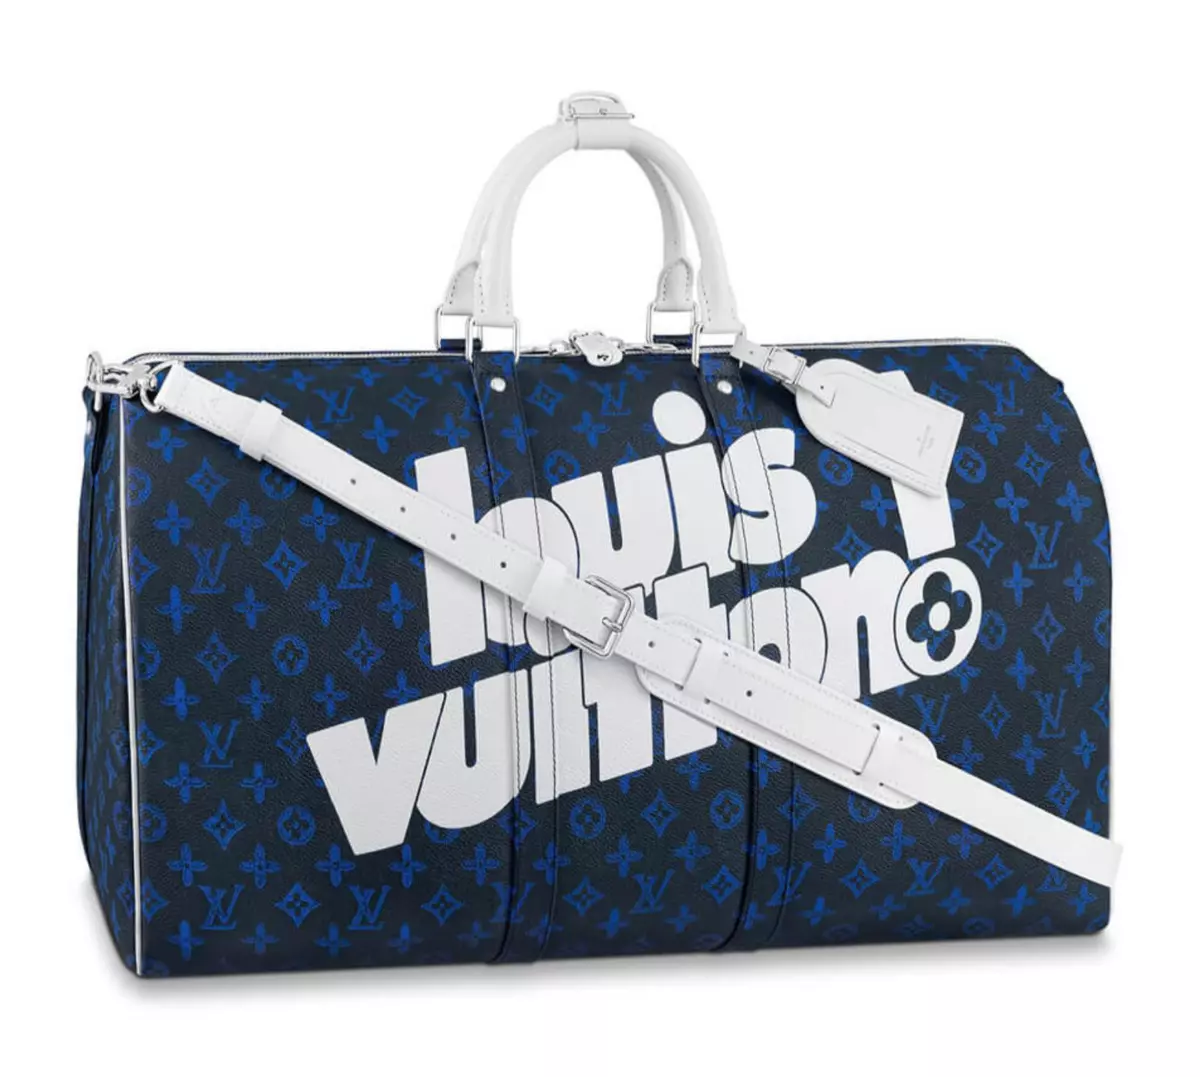 Louis Vuitton Keepall Bandouliere 55 Blue White Exclamation Weekend Travel | eBay